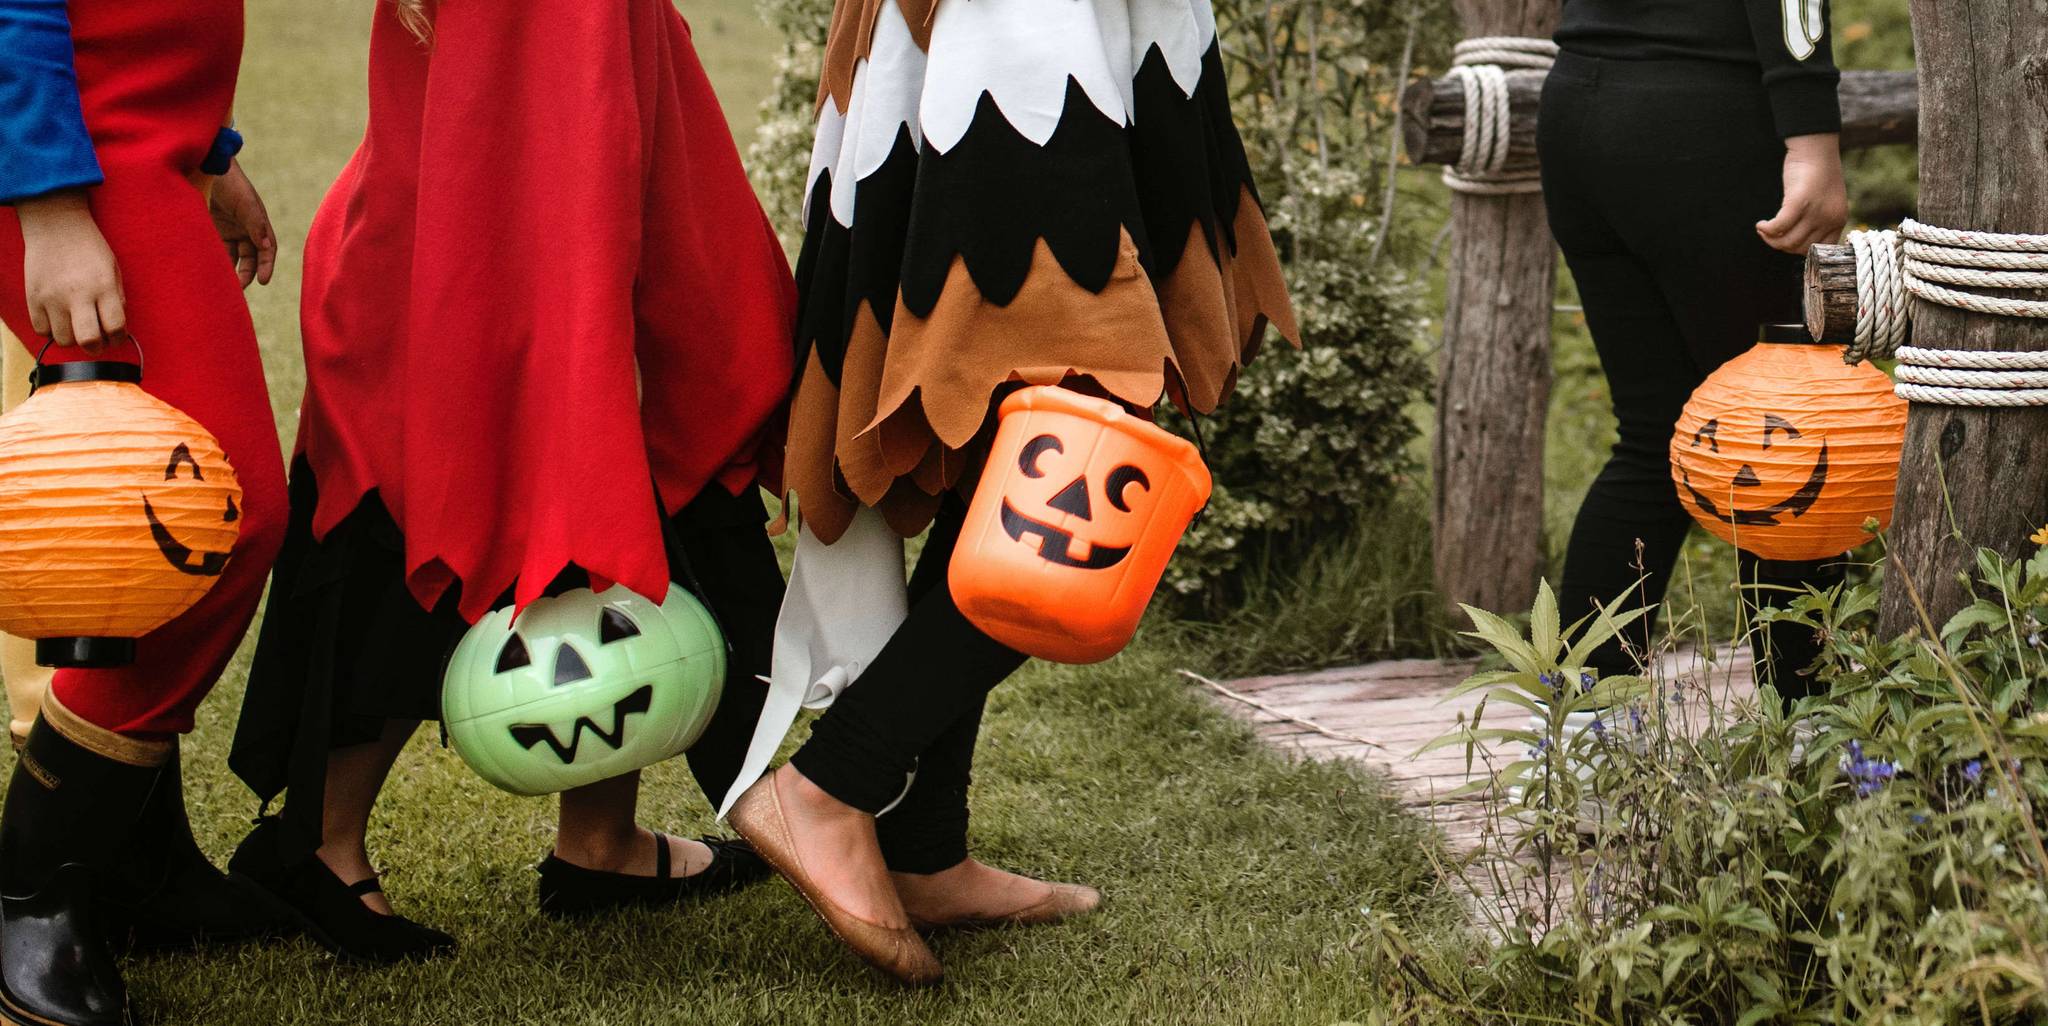 Americans are spending scary money at Halloween